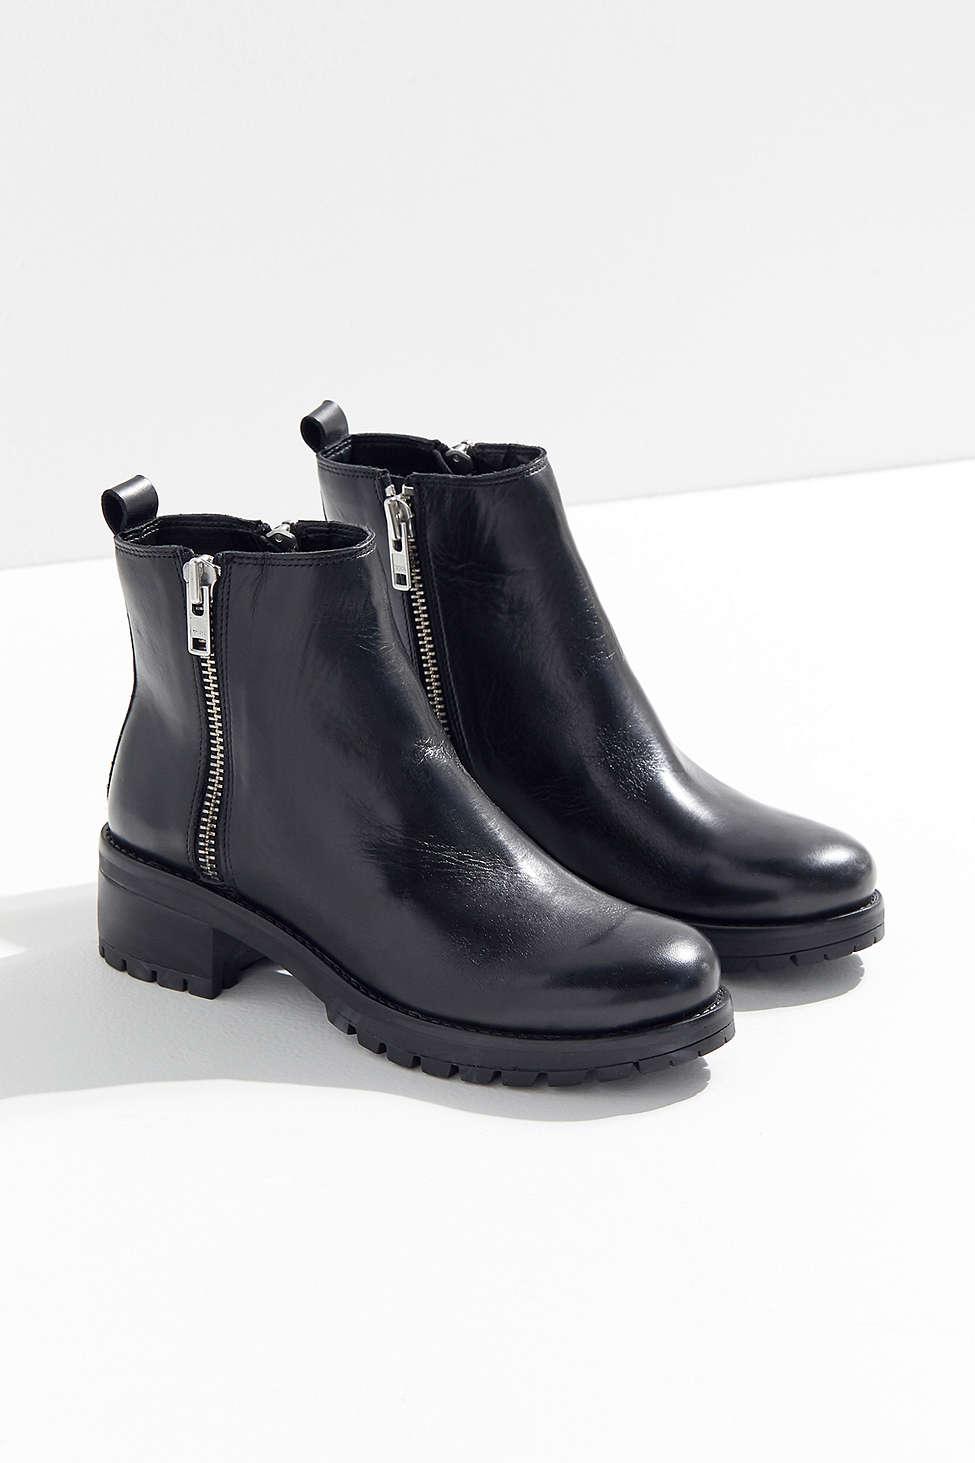 urban outfitters maci chelsea boot